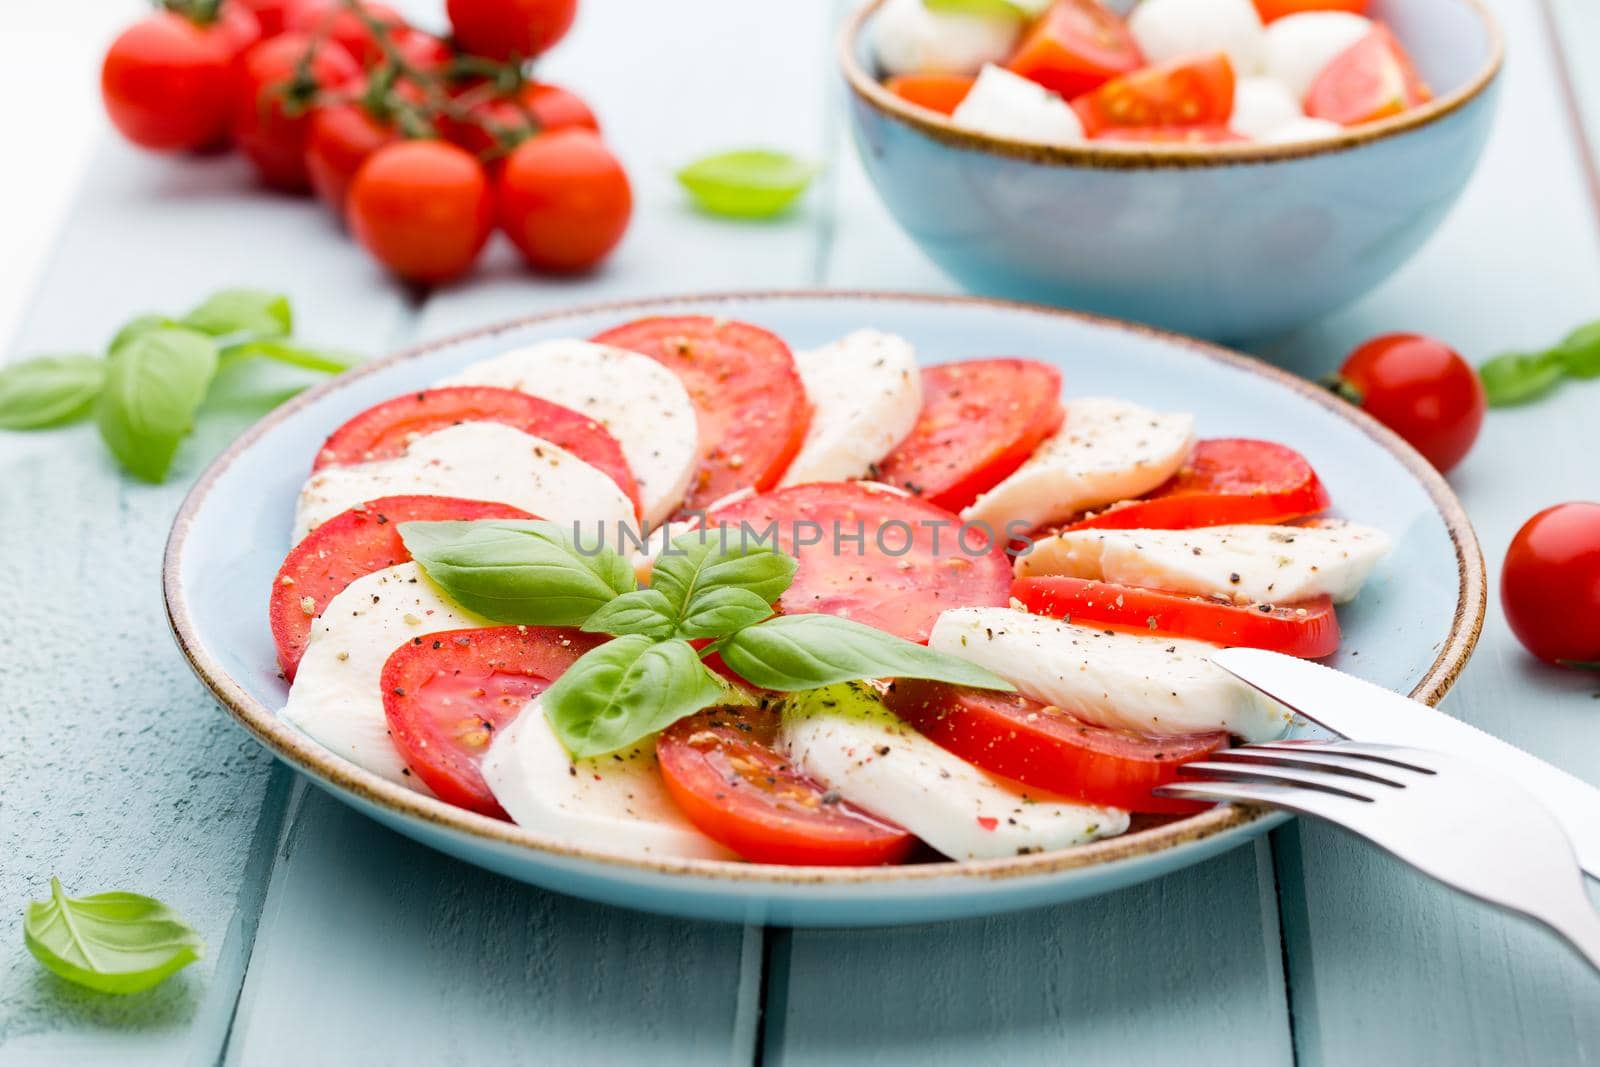 Tomatoes, mozzarella cheese, basil and spices on gray slate stone chalkboard. Italian traditional caprese salad ingredients. Mediterranean food.